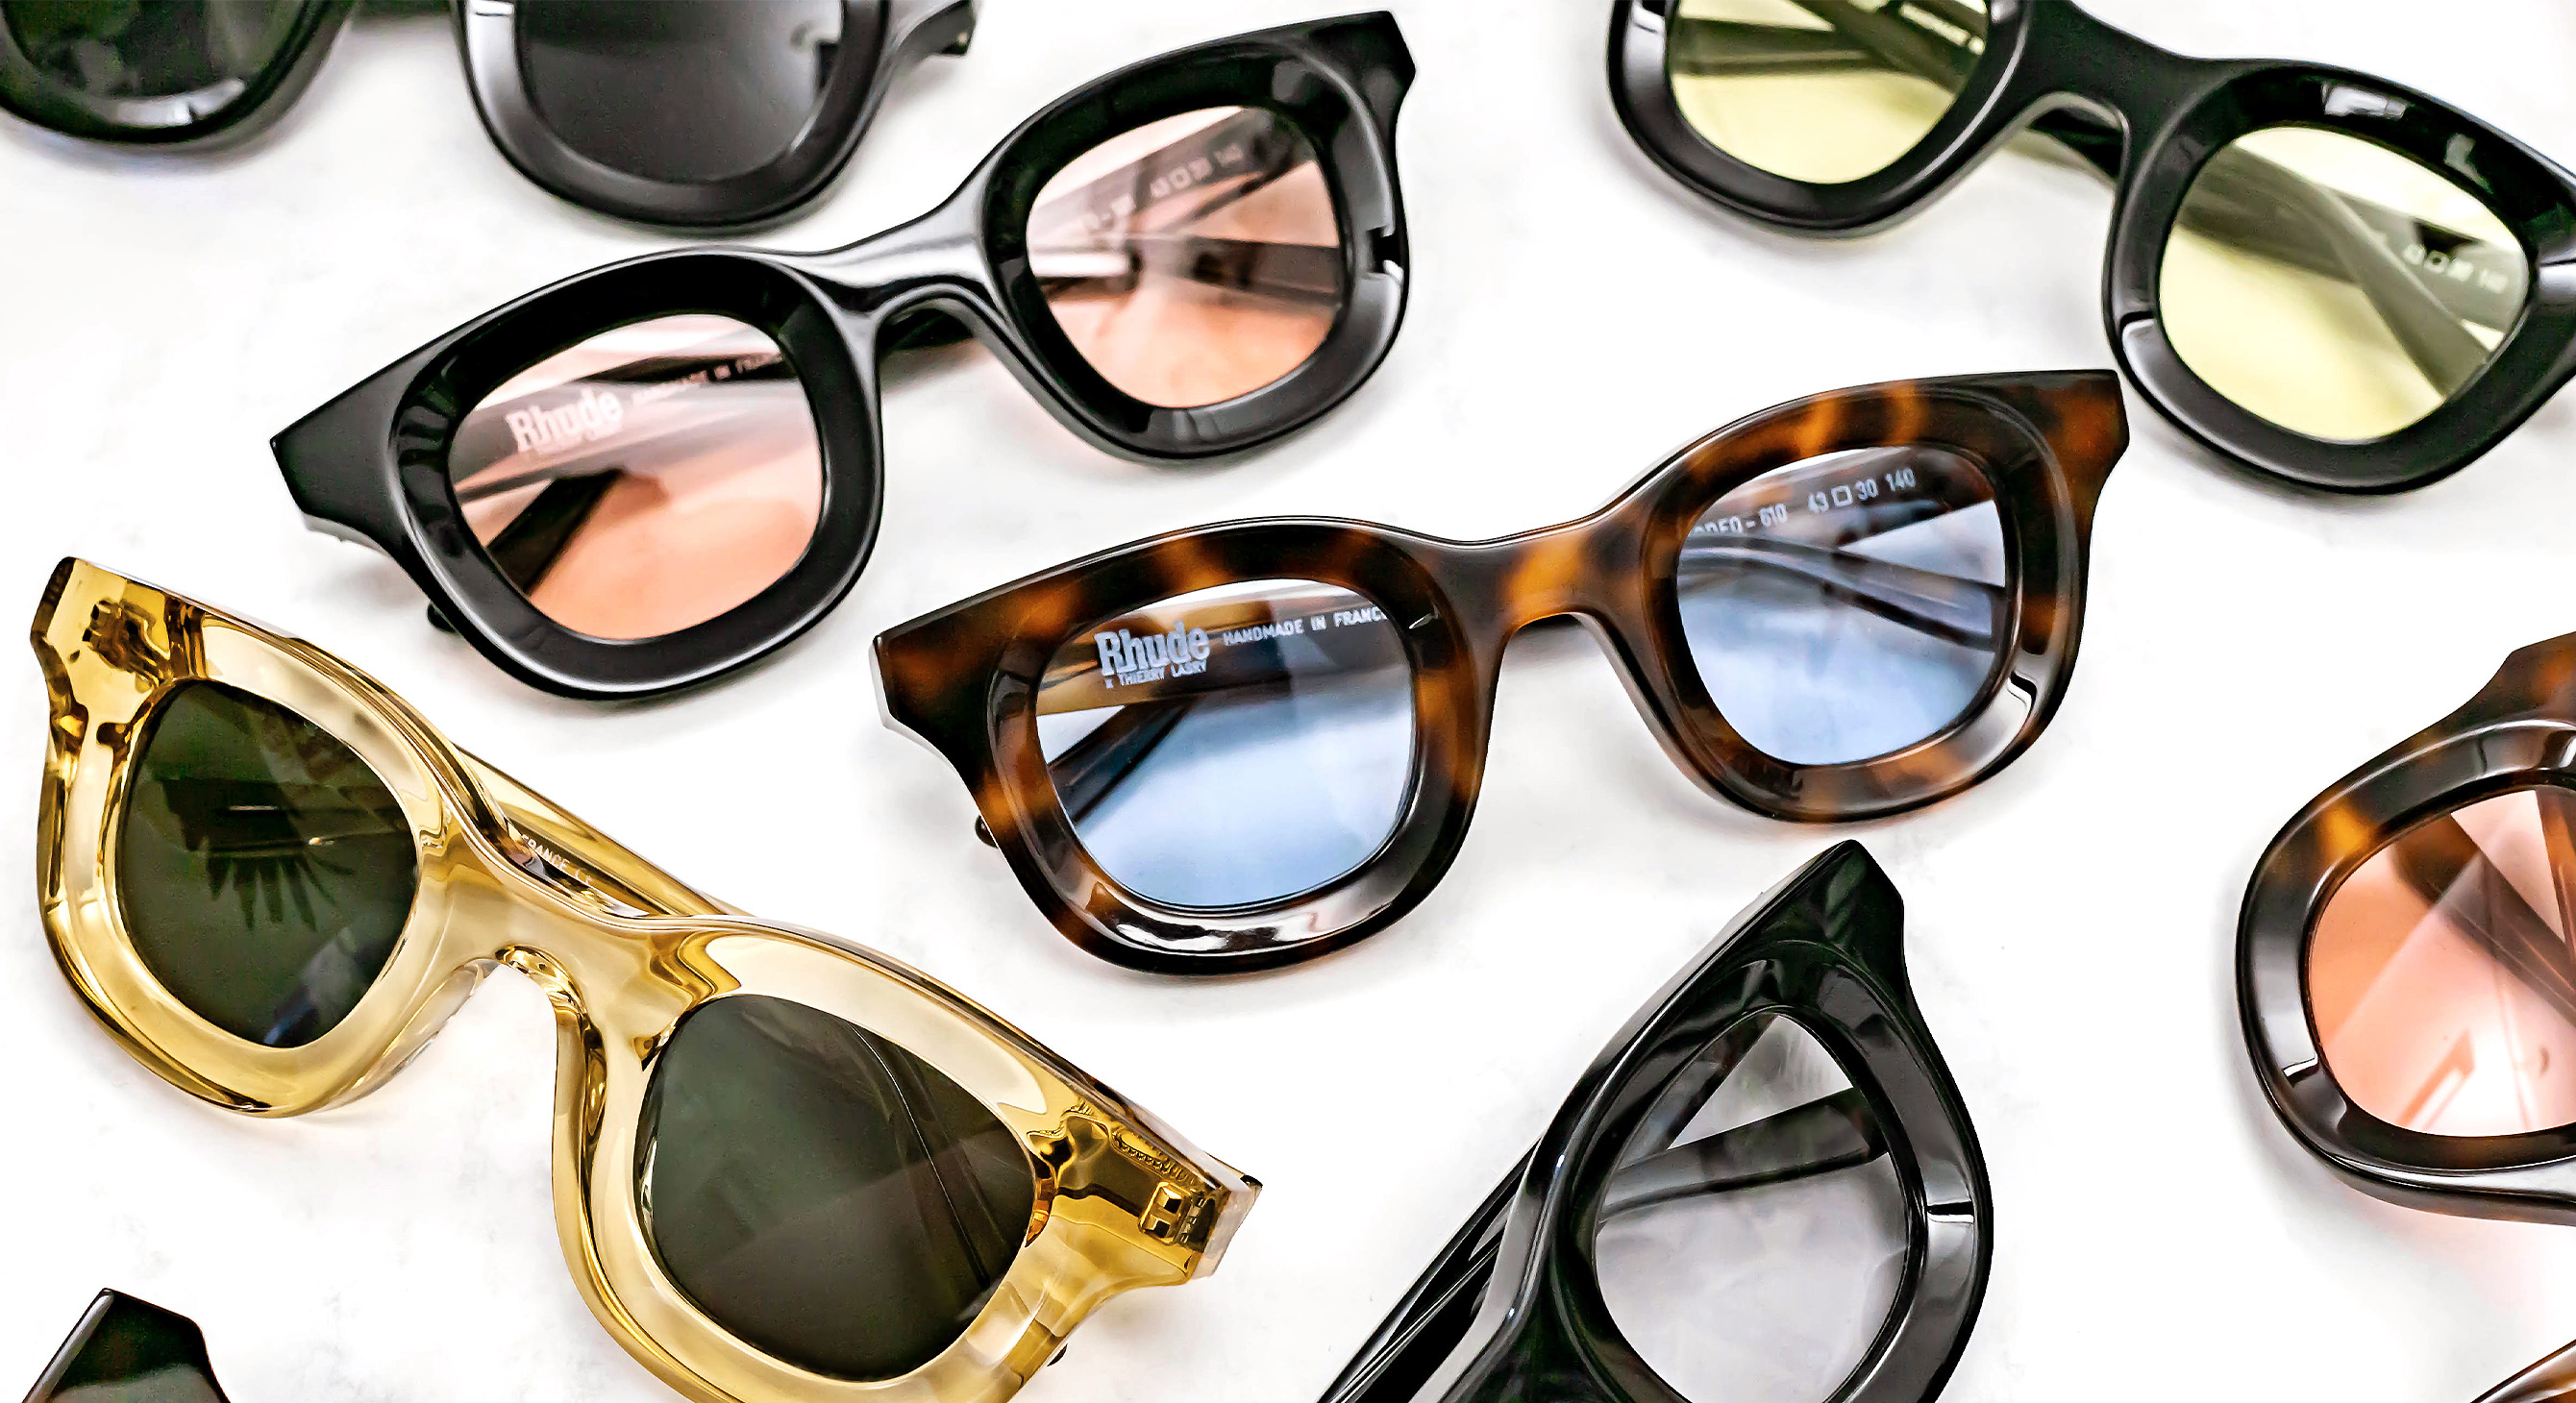 RHUDE x THIERRY LASRY | Thierry Lasry